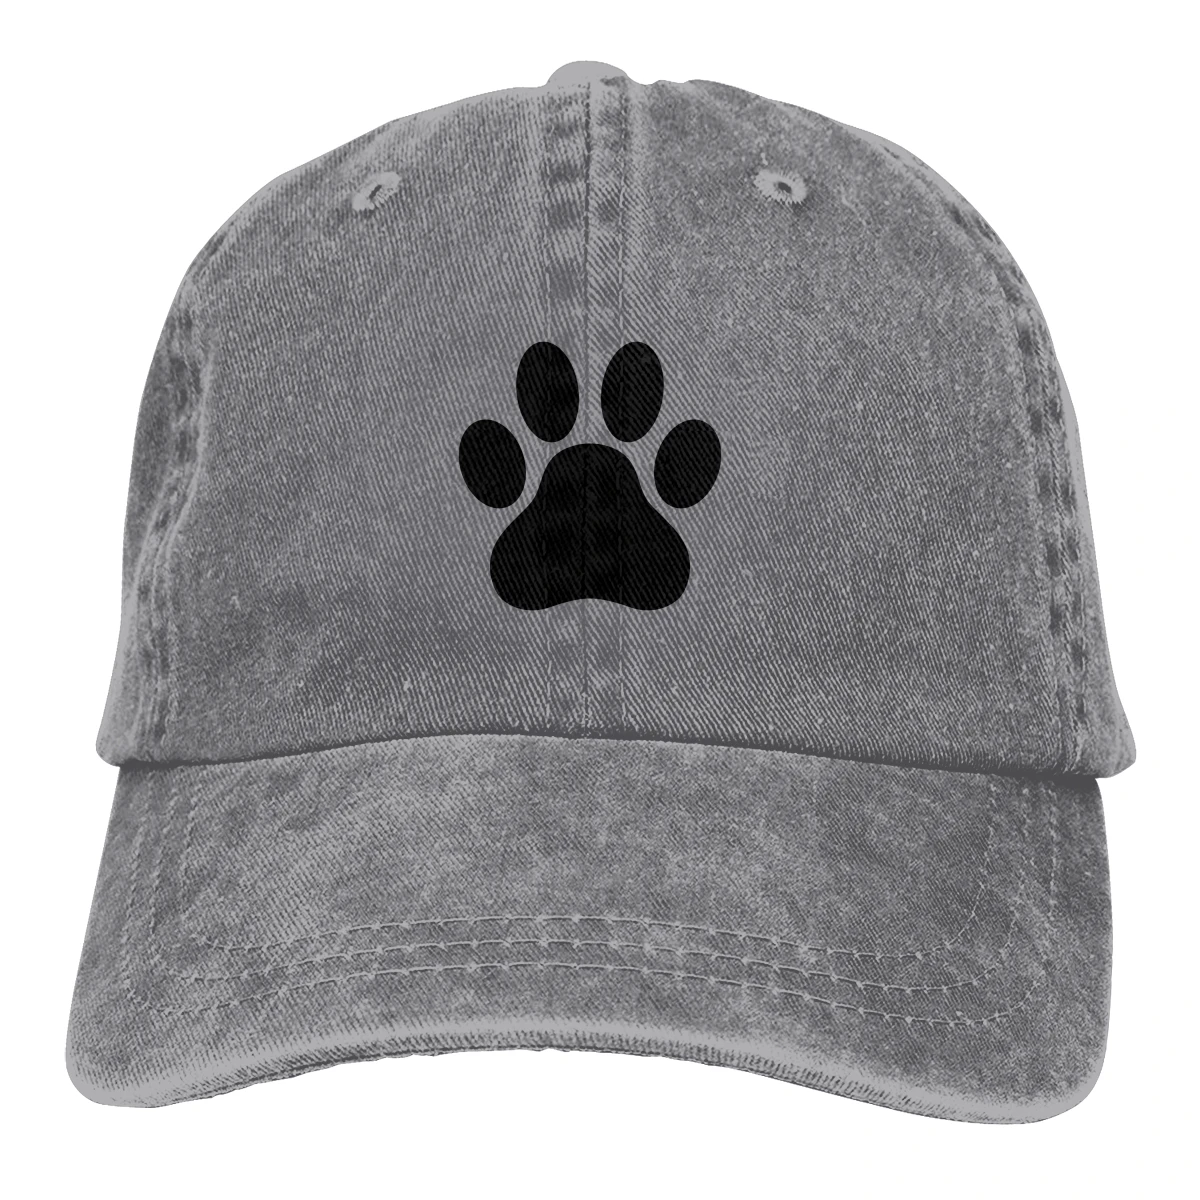 Black Dog Paw Washed Cotton Pure Color Light Board Men's Baseball Cap Stitching Dad Hat